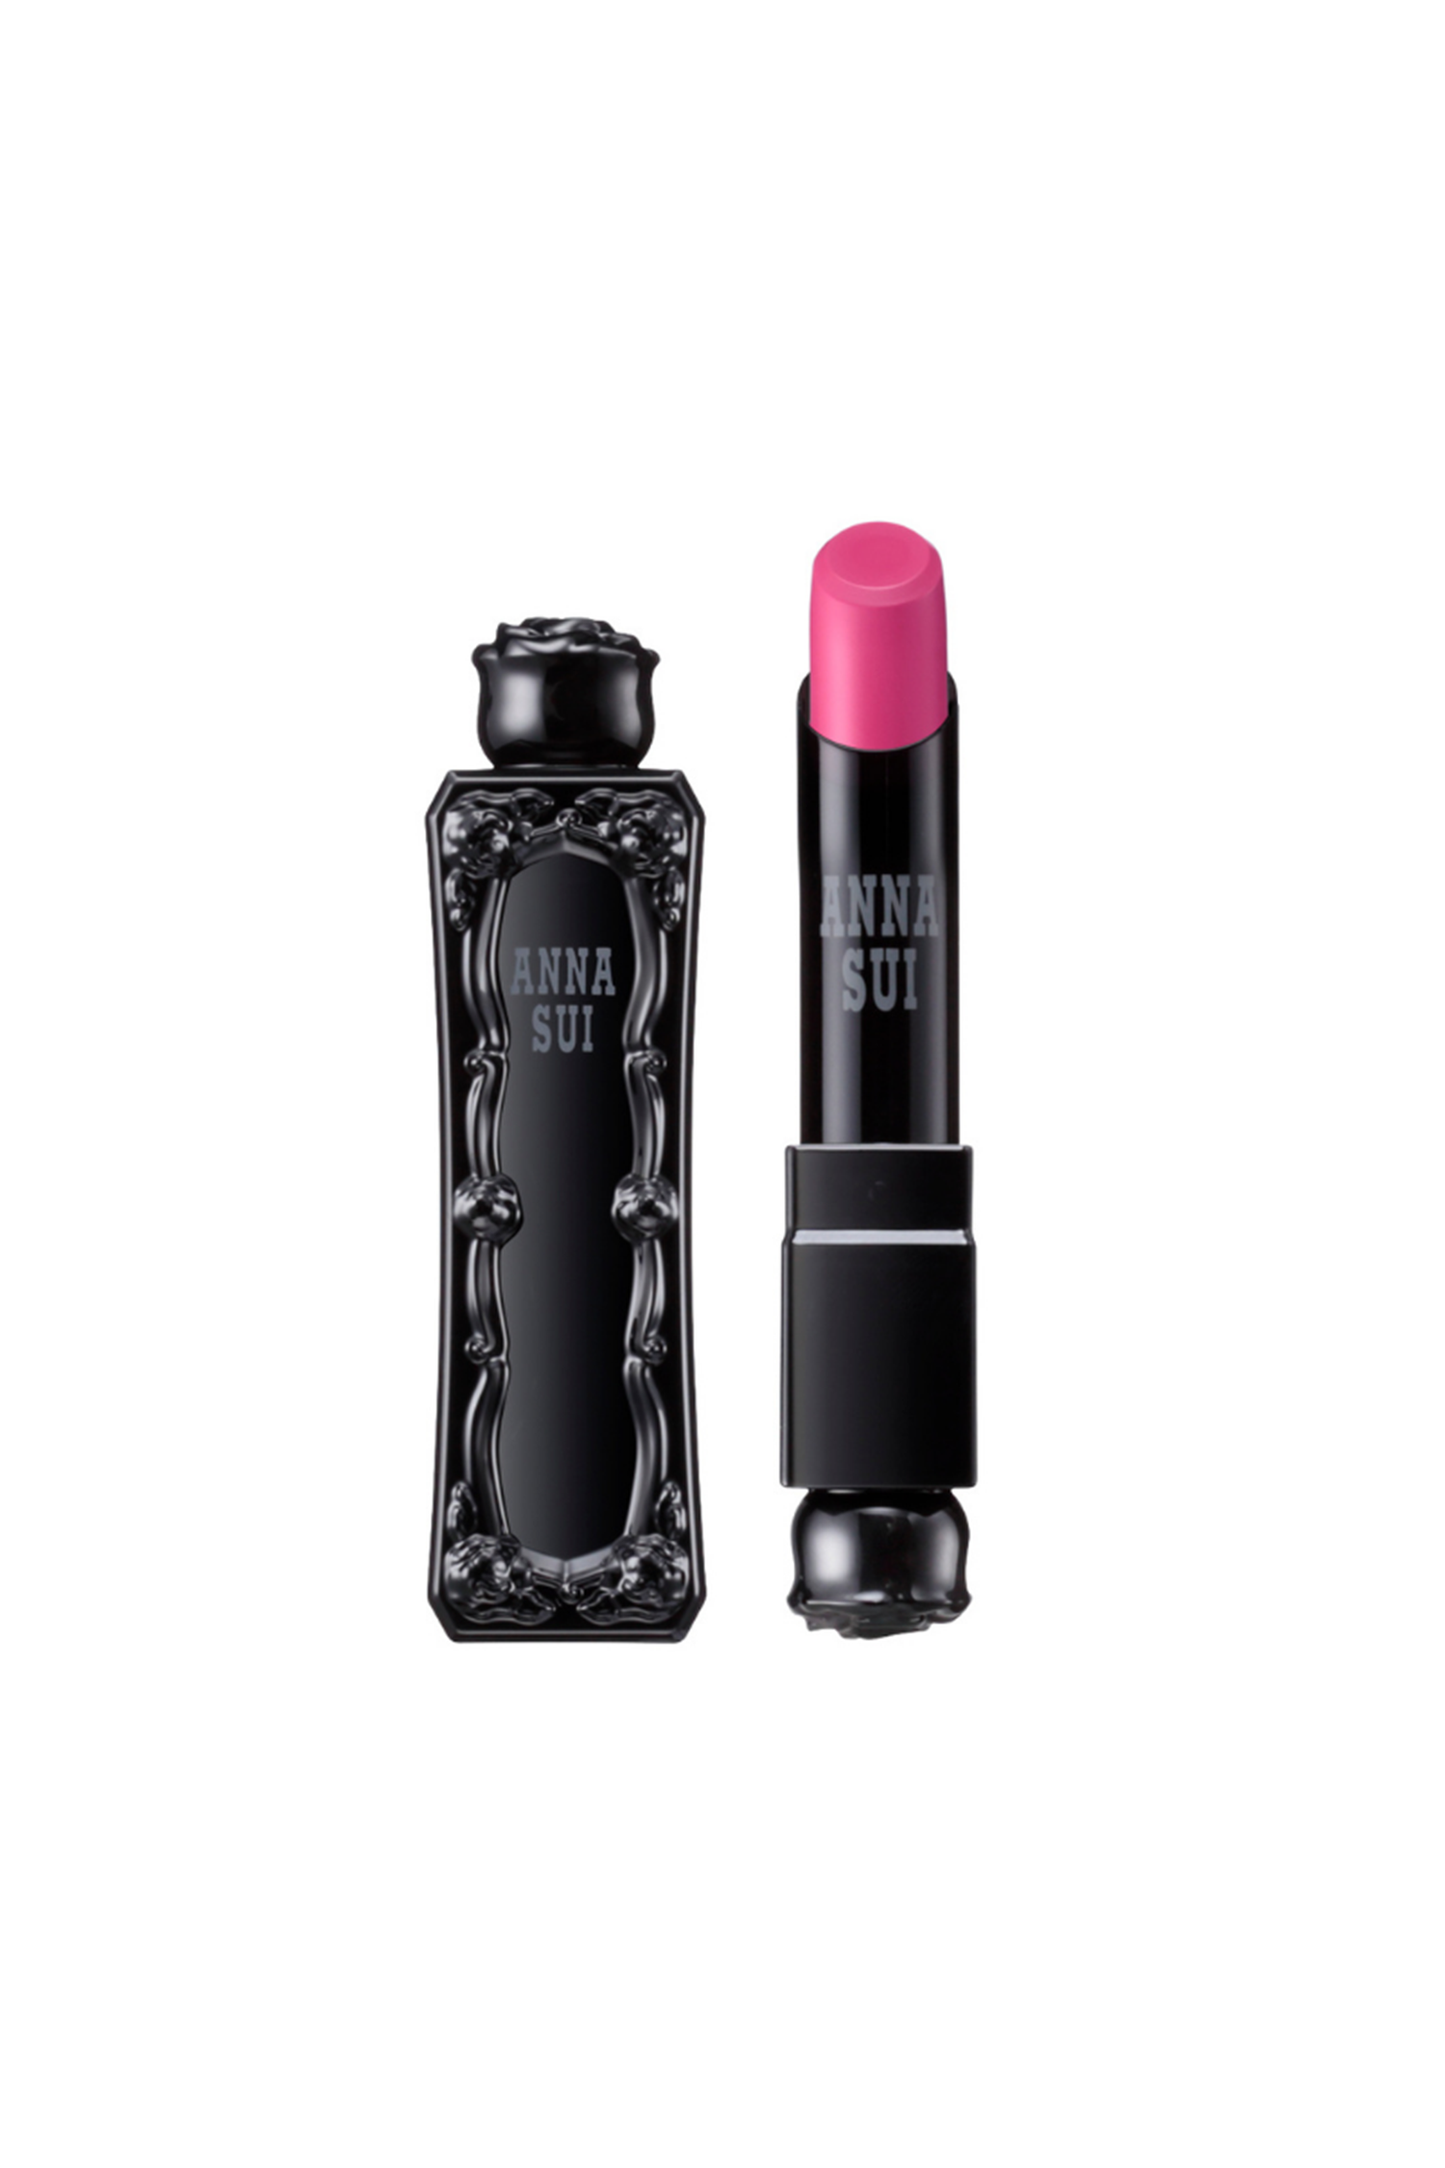 Hot Pink lipstick, in an Anna Sui, black container with raised rose pattern, rose on top 